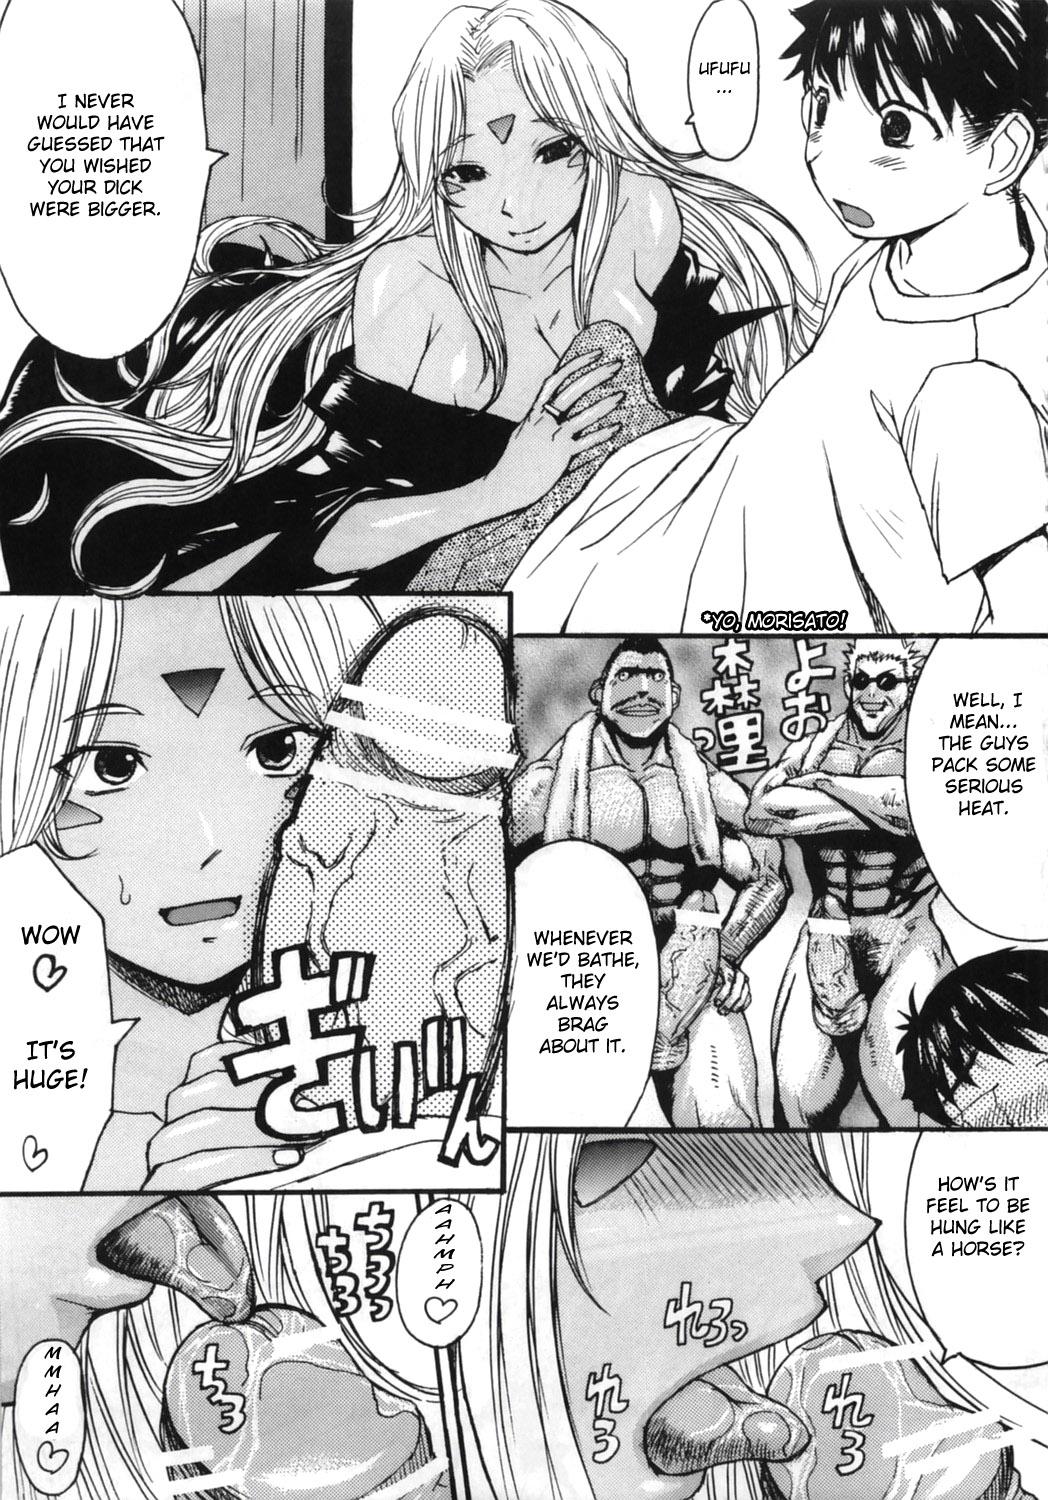 Soloboy Ano Subarashii Ane wo Mou Ichido | One More Time With the Beautiful Sister - Ah my goddess Chica - Page 10